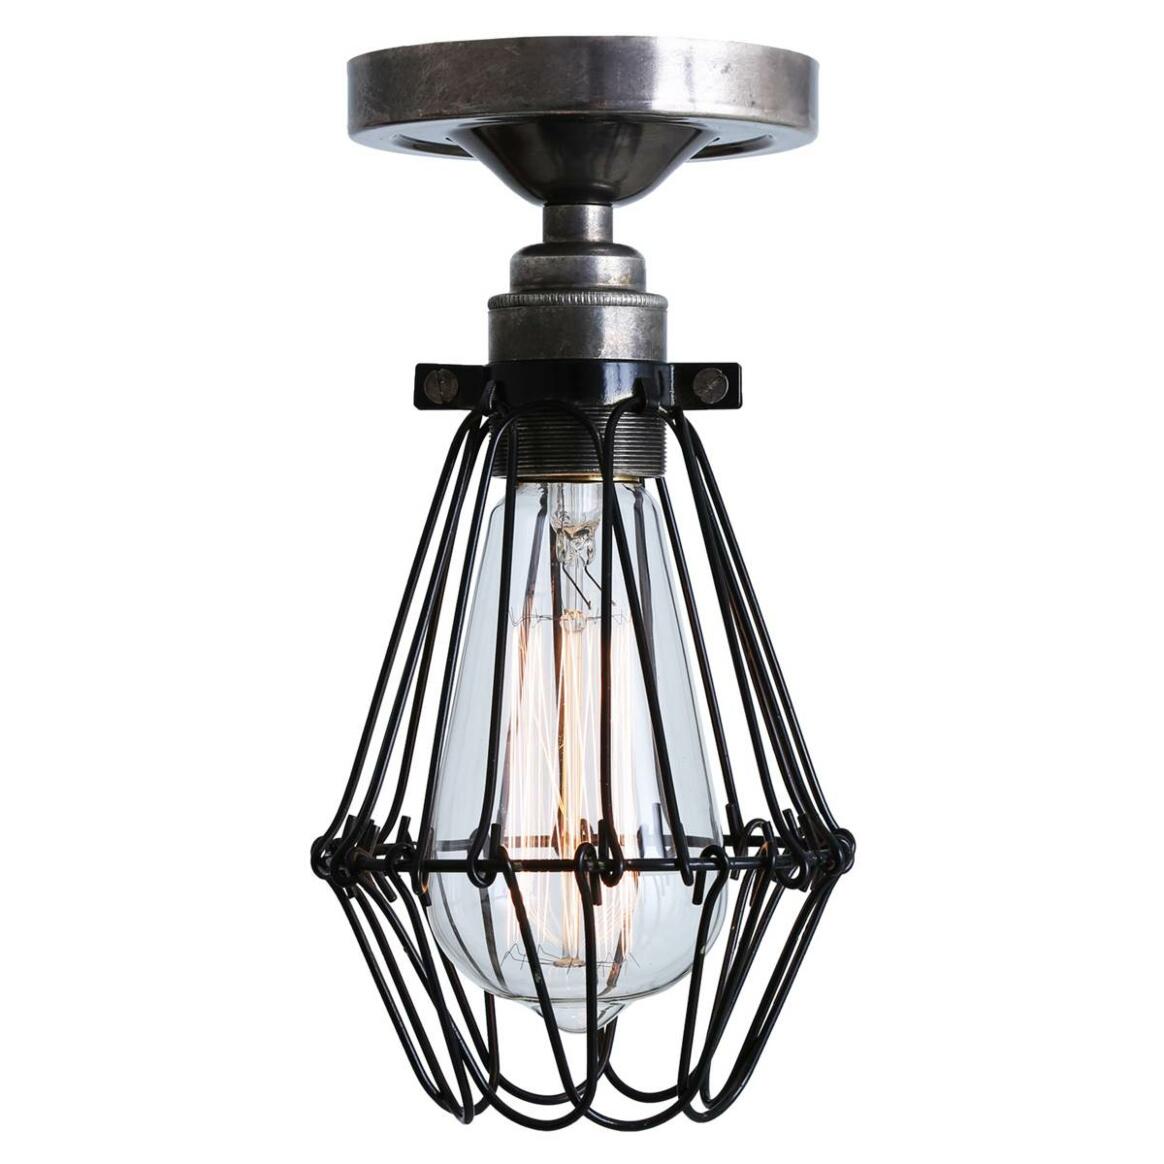 Apoch Industrial Cage Flush Ceiling Light main product image